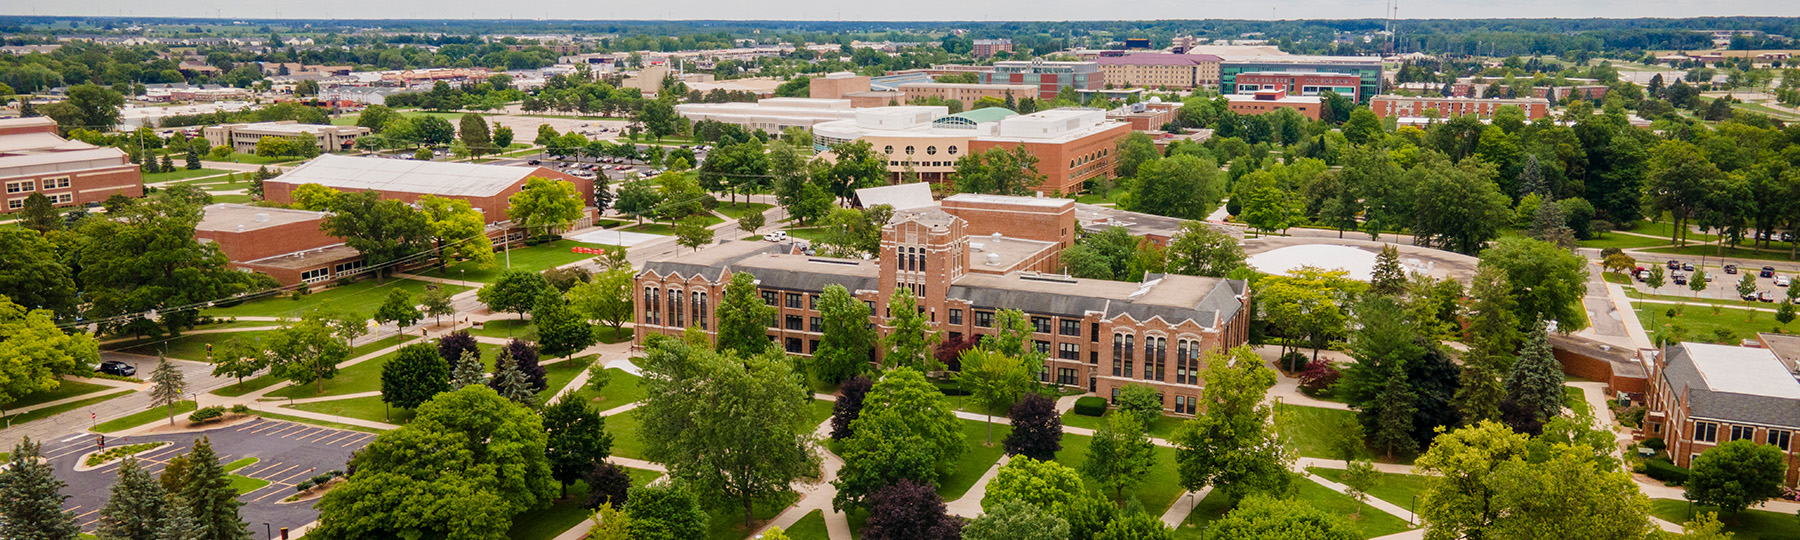 Drone image of campus featuring Warriner Hall.